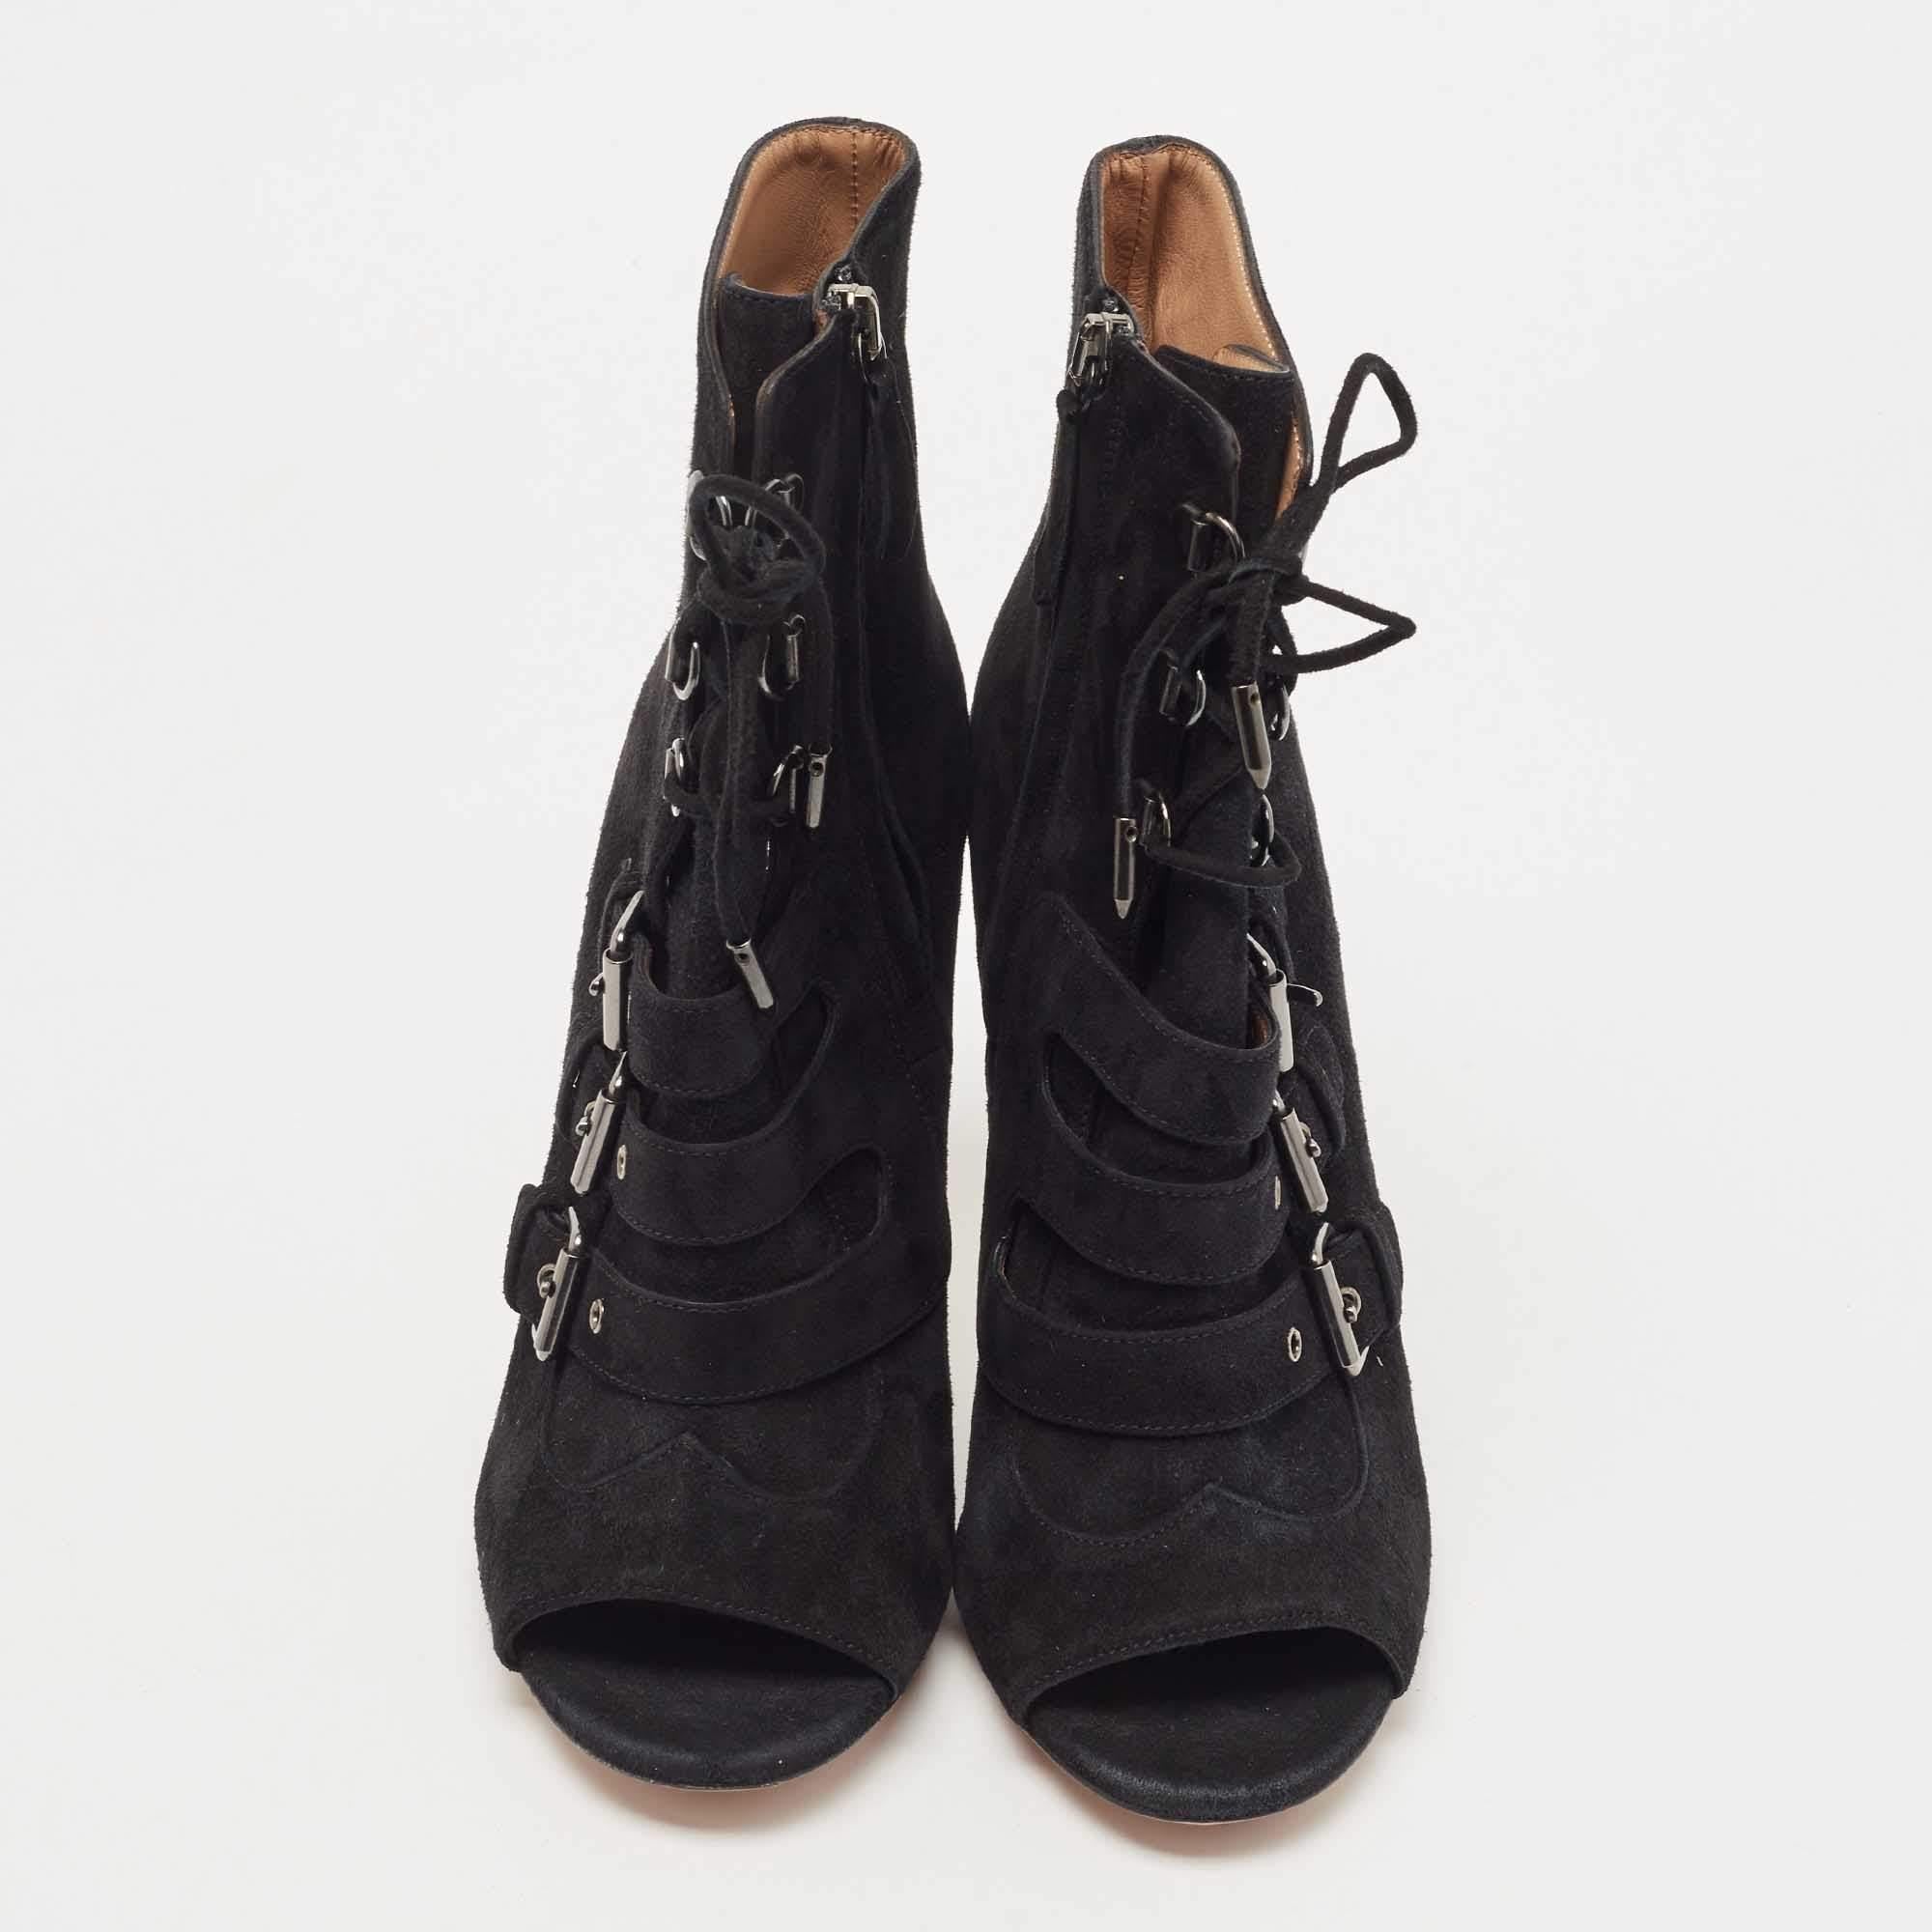 Meticulously designed into a smart silhouette, these Aquazzura boots are on-point with style. They come with comfortable insoles and durable outsoles to last you forever. These boots are just amazing, and you definitely need to get them right